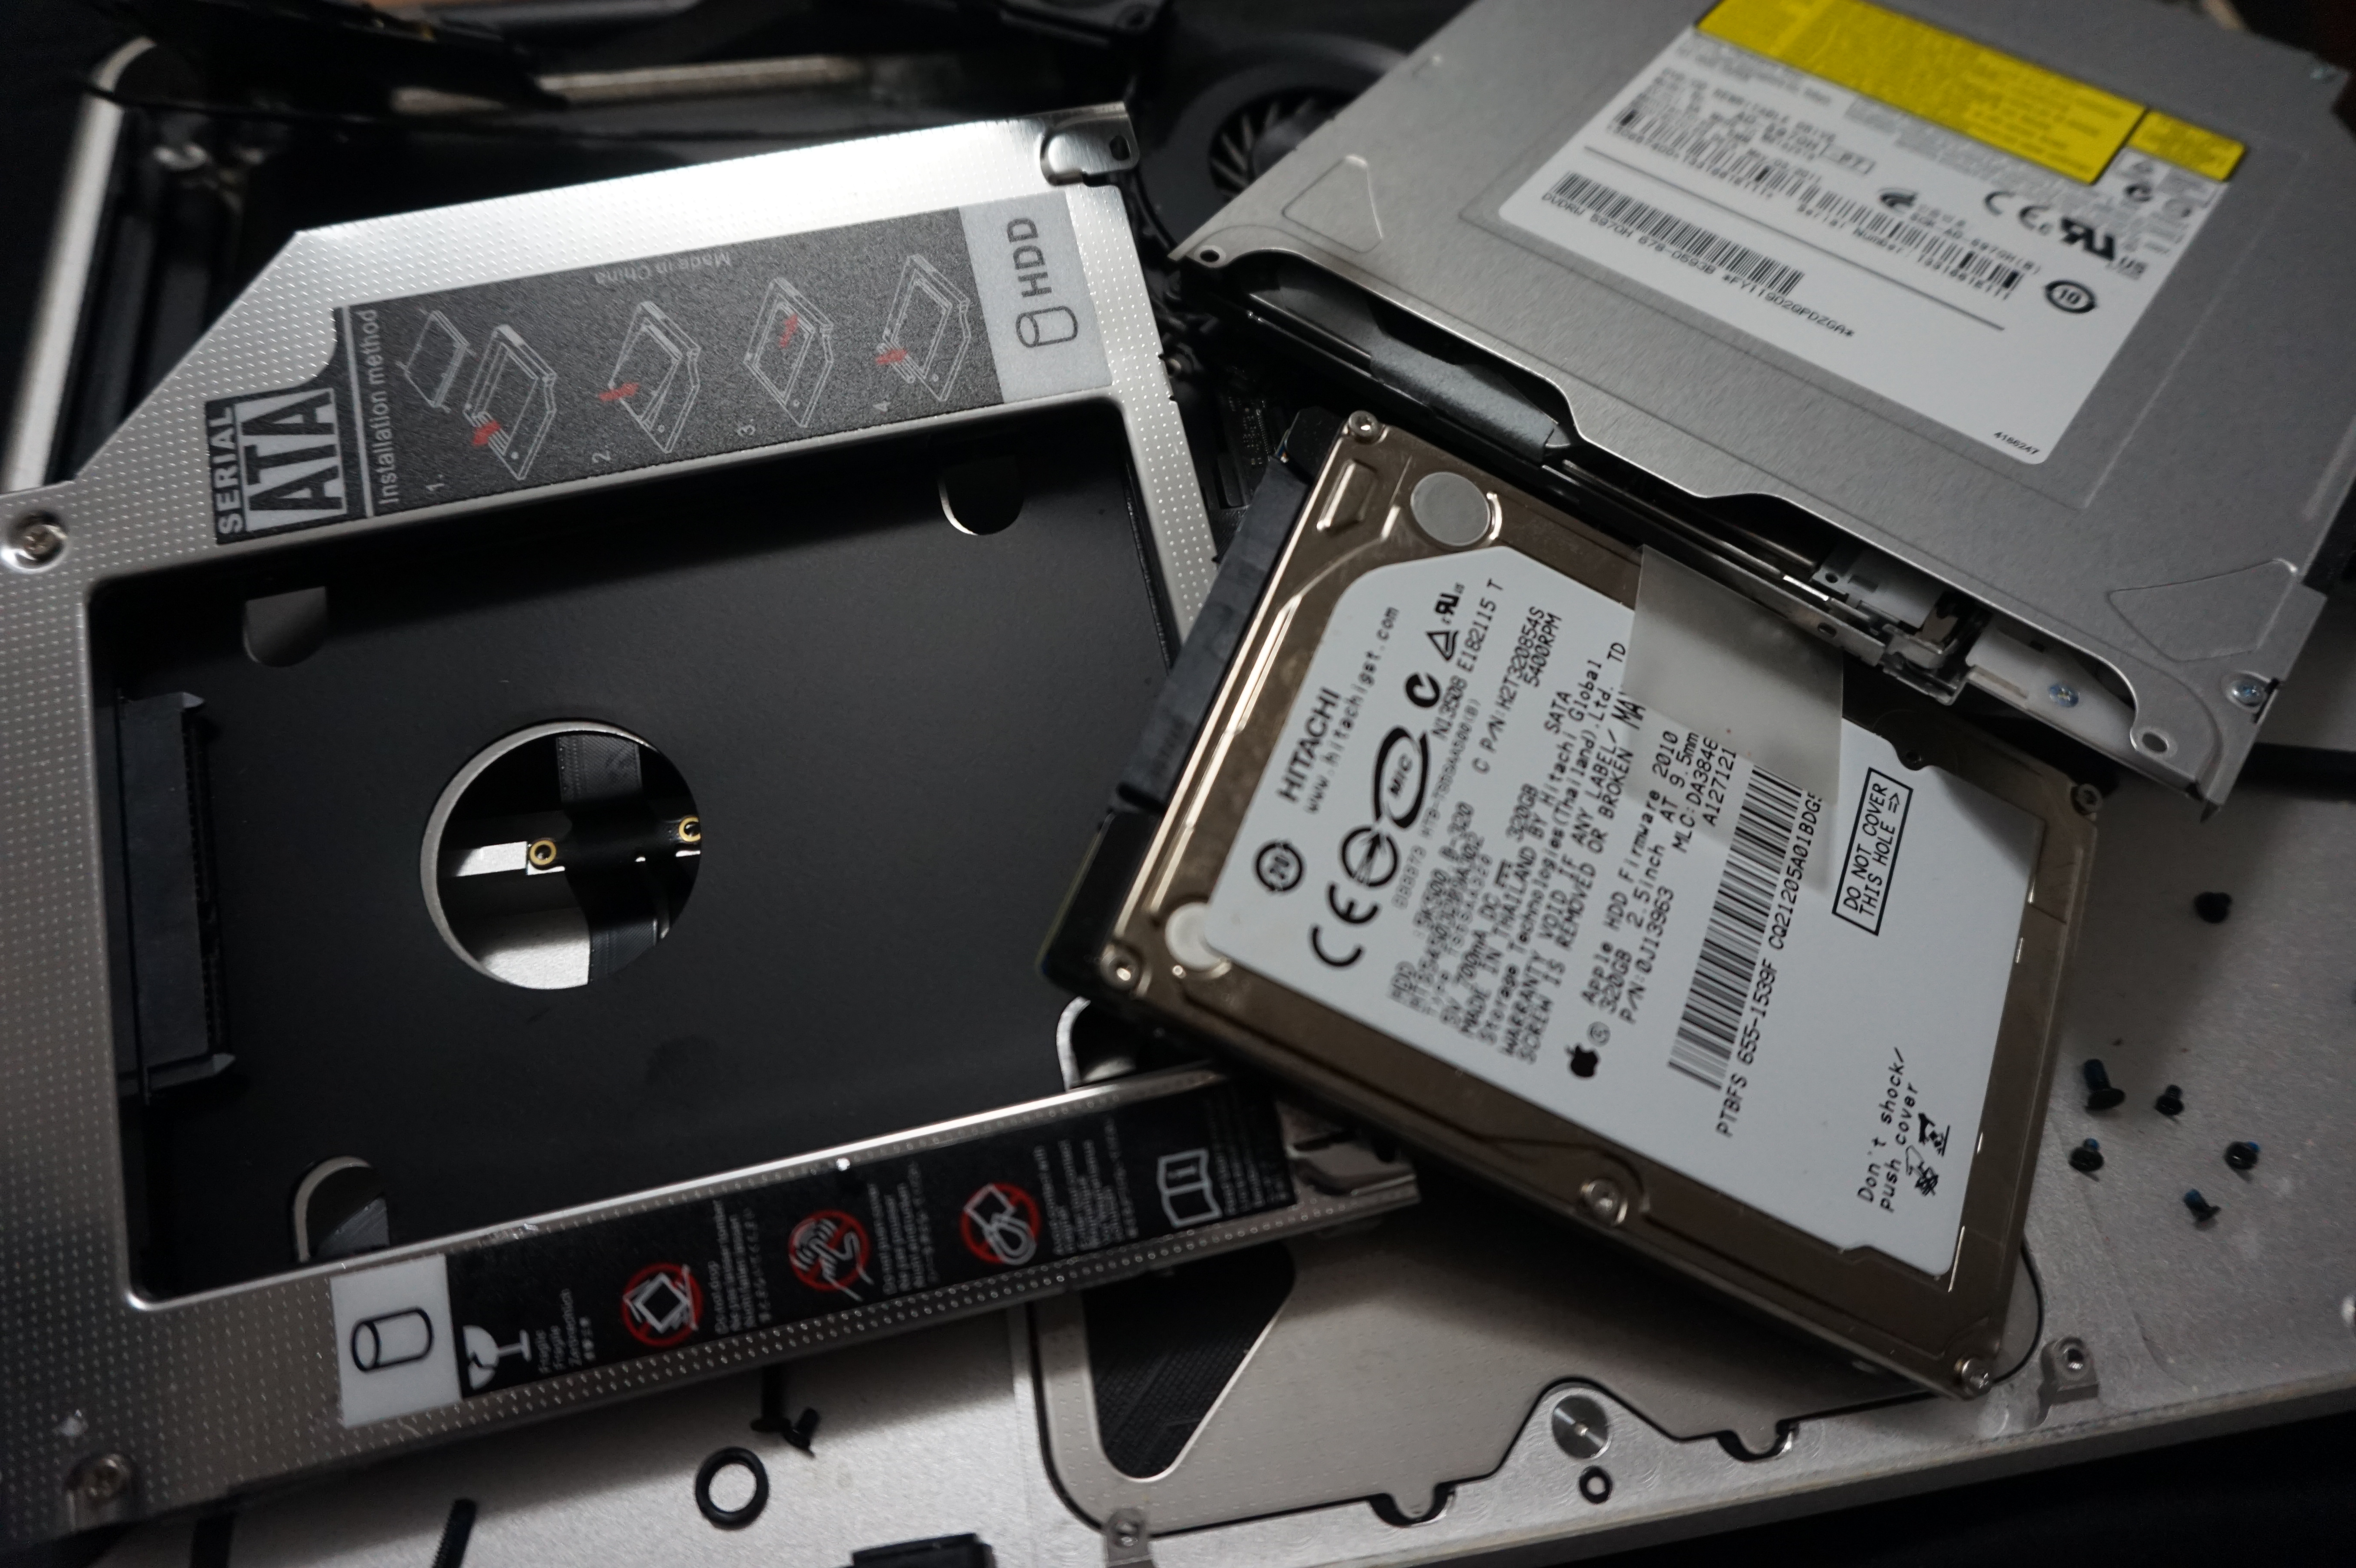 install hard drive into optical drive slot on a laptop